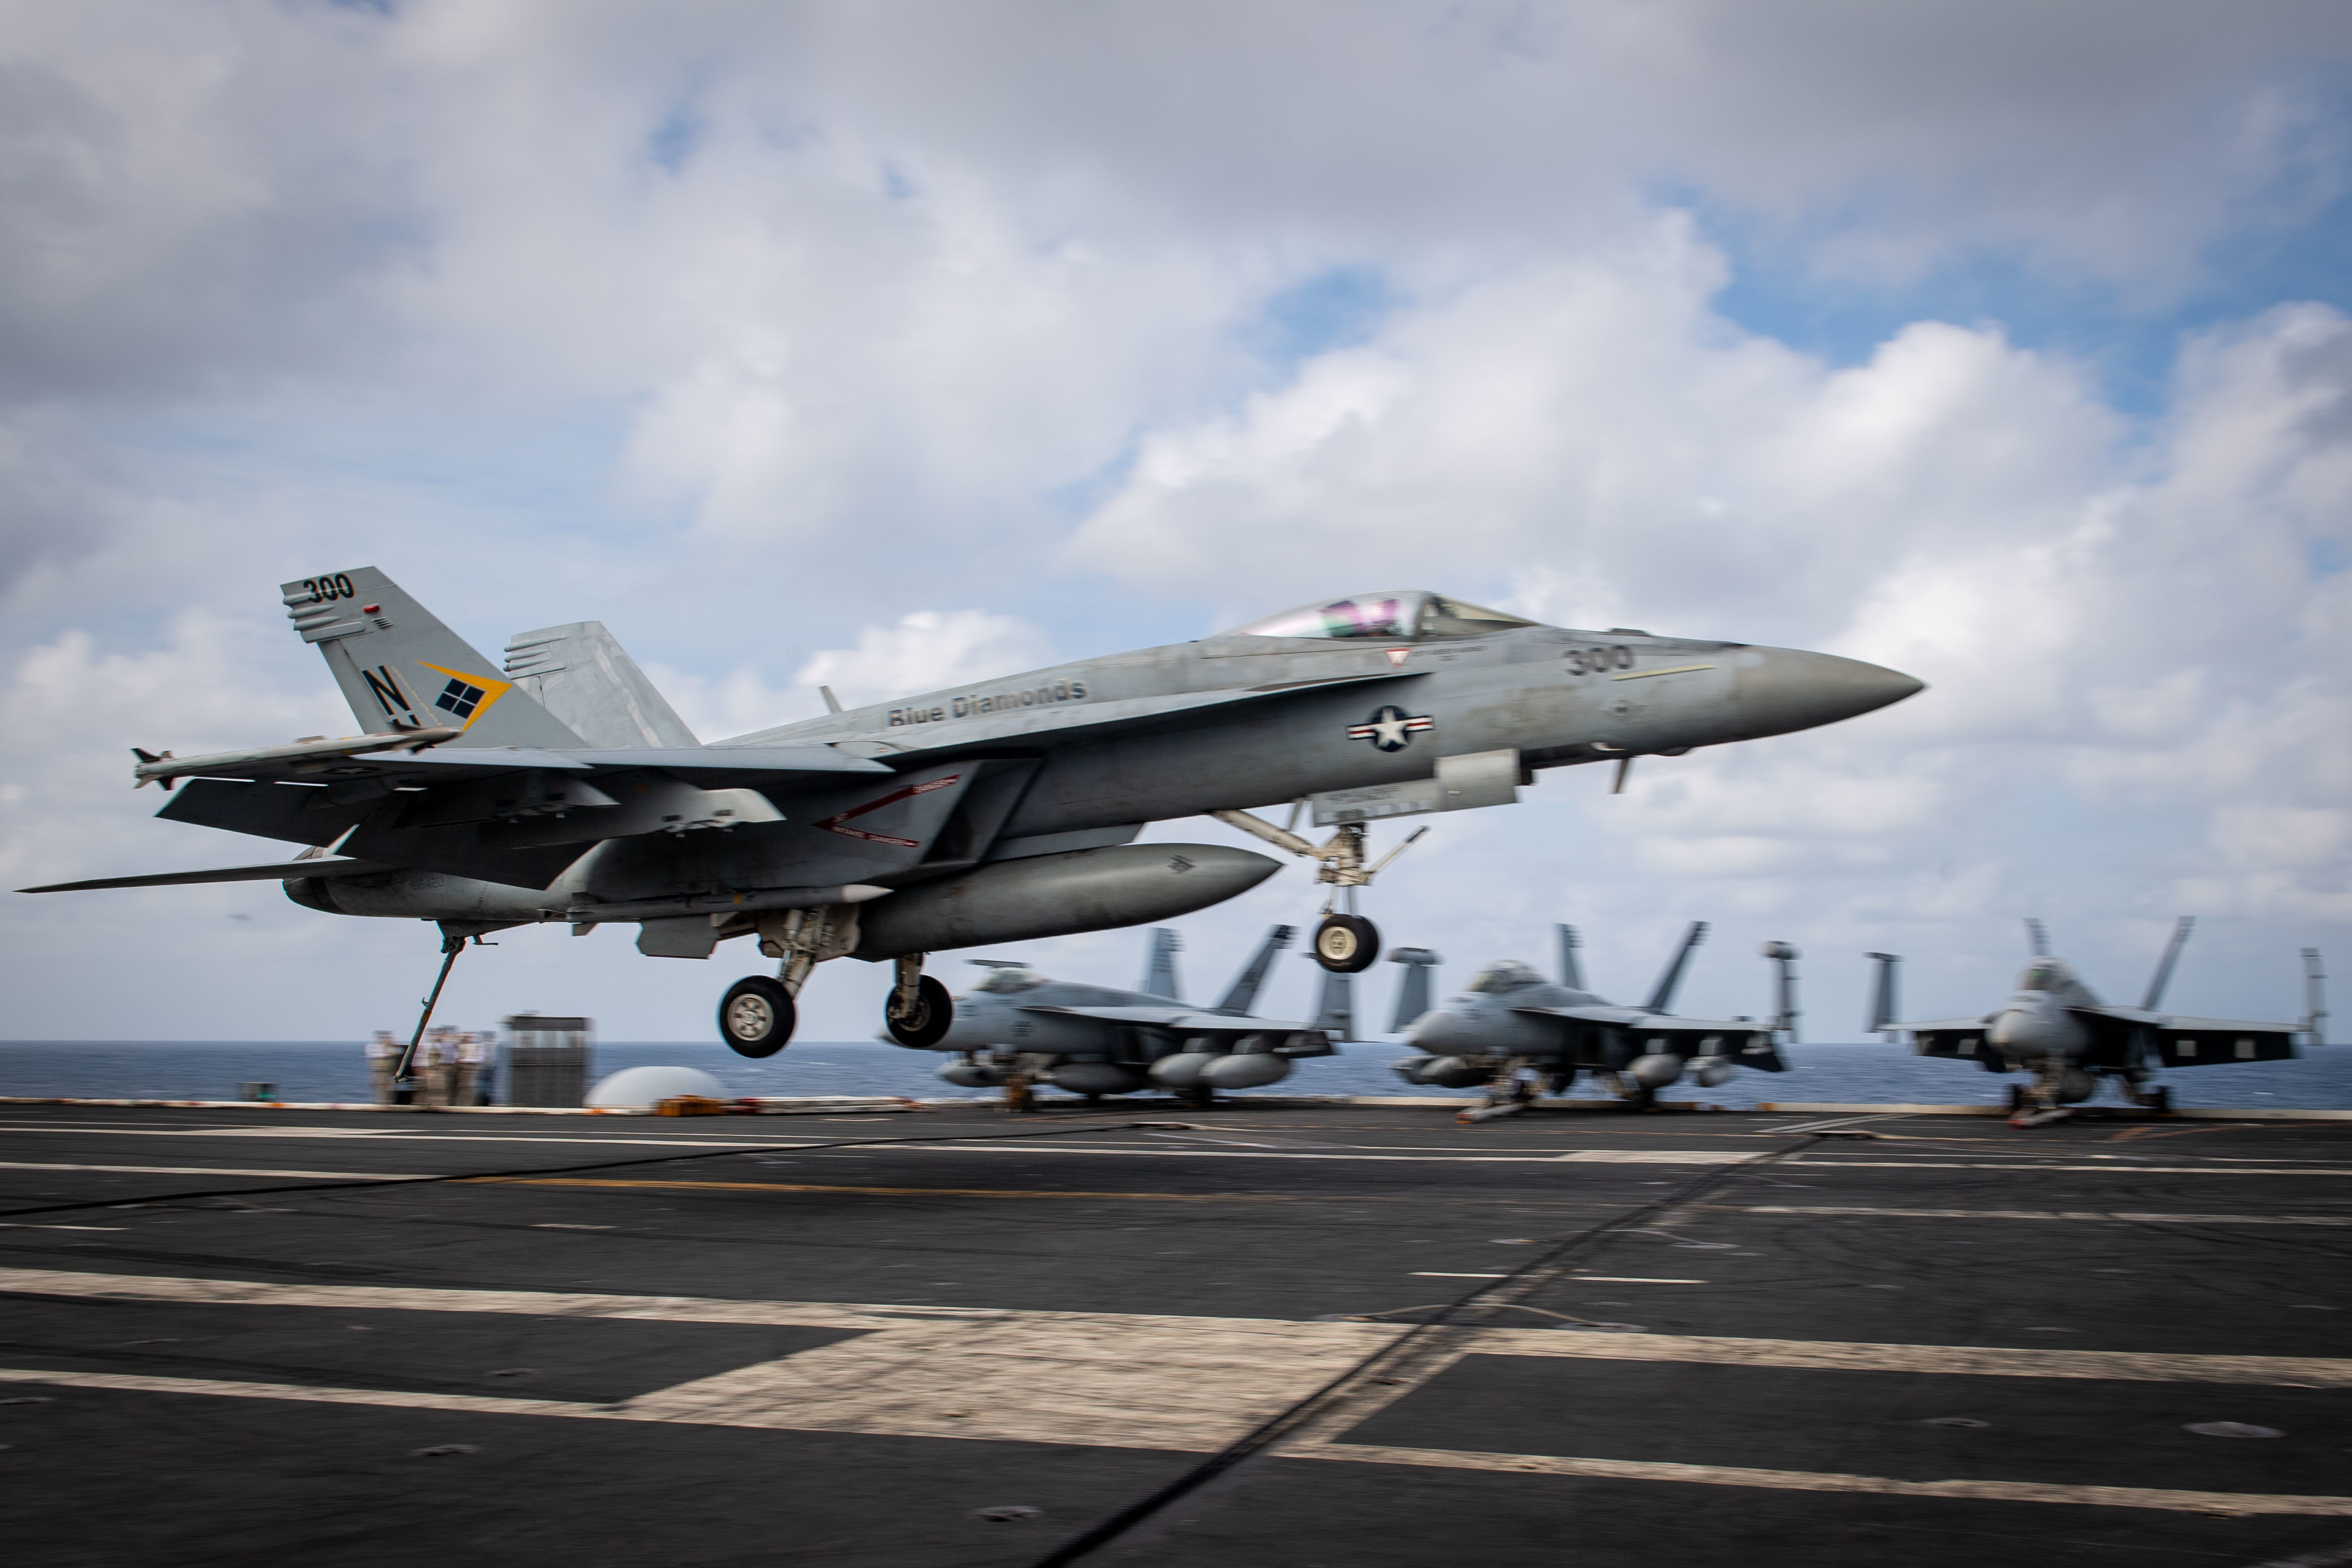 U.S. Navy F/A-18E Super Hornet  twin-engine, carrier-capable, multirole fighter